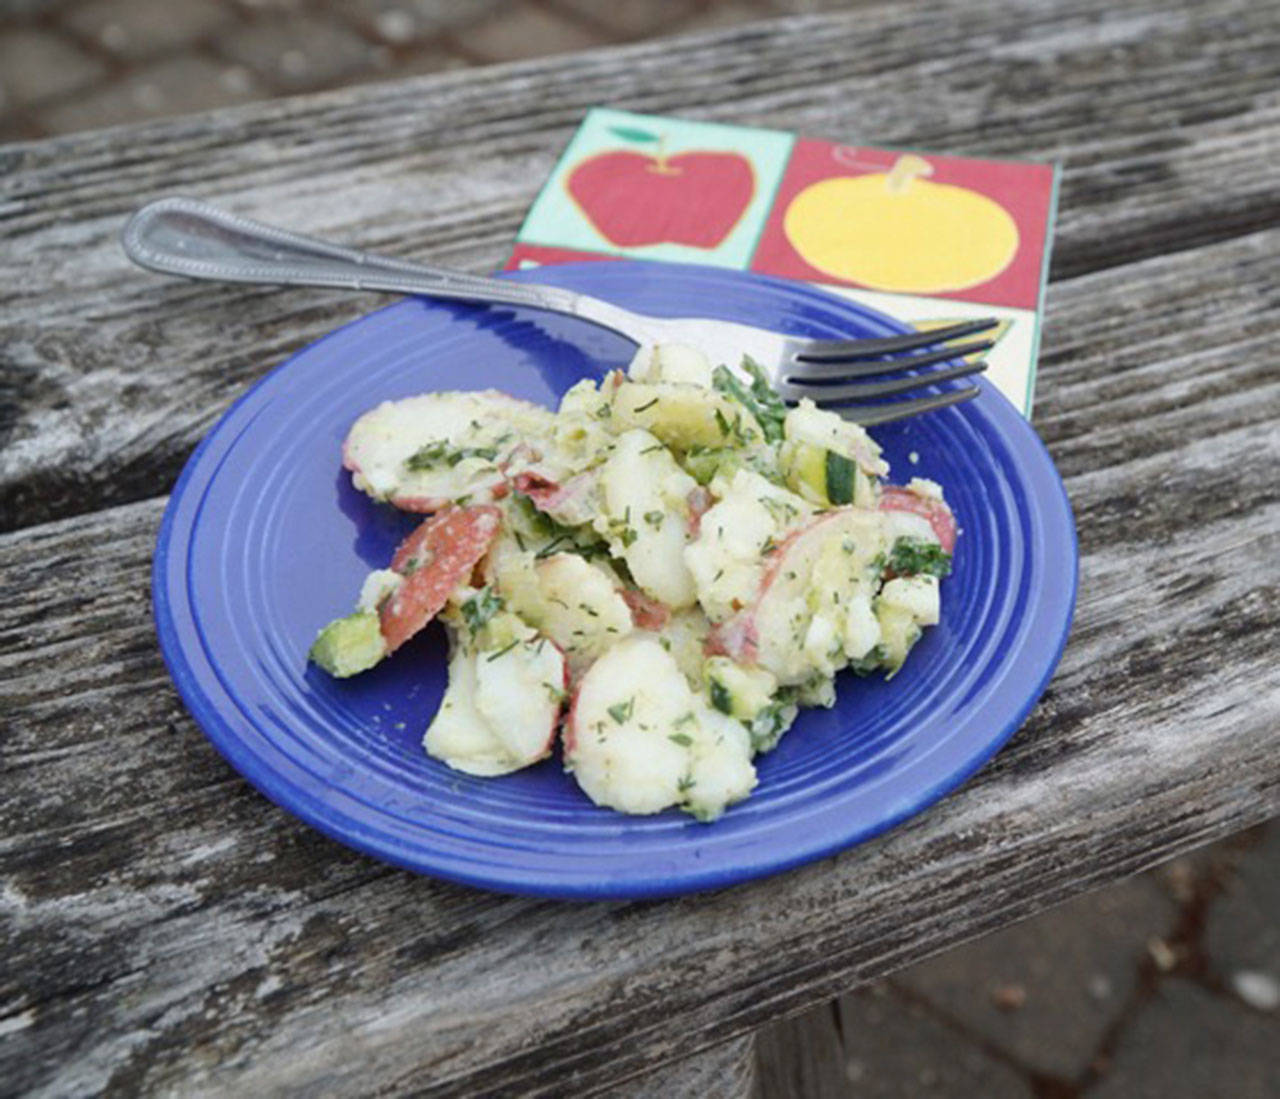 An herbed potato salad makes for a diet-friendly meal at gatherings. (Betsy Wharton/for Peninsula Daily News)